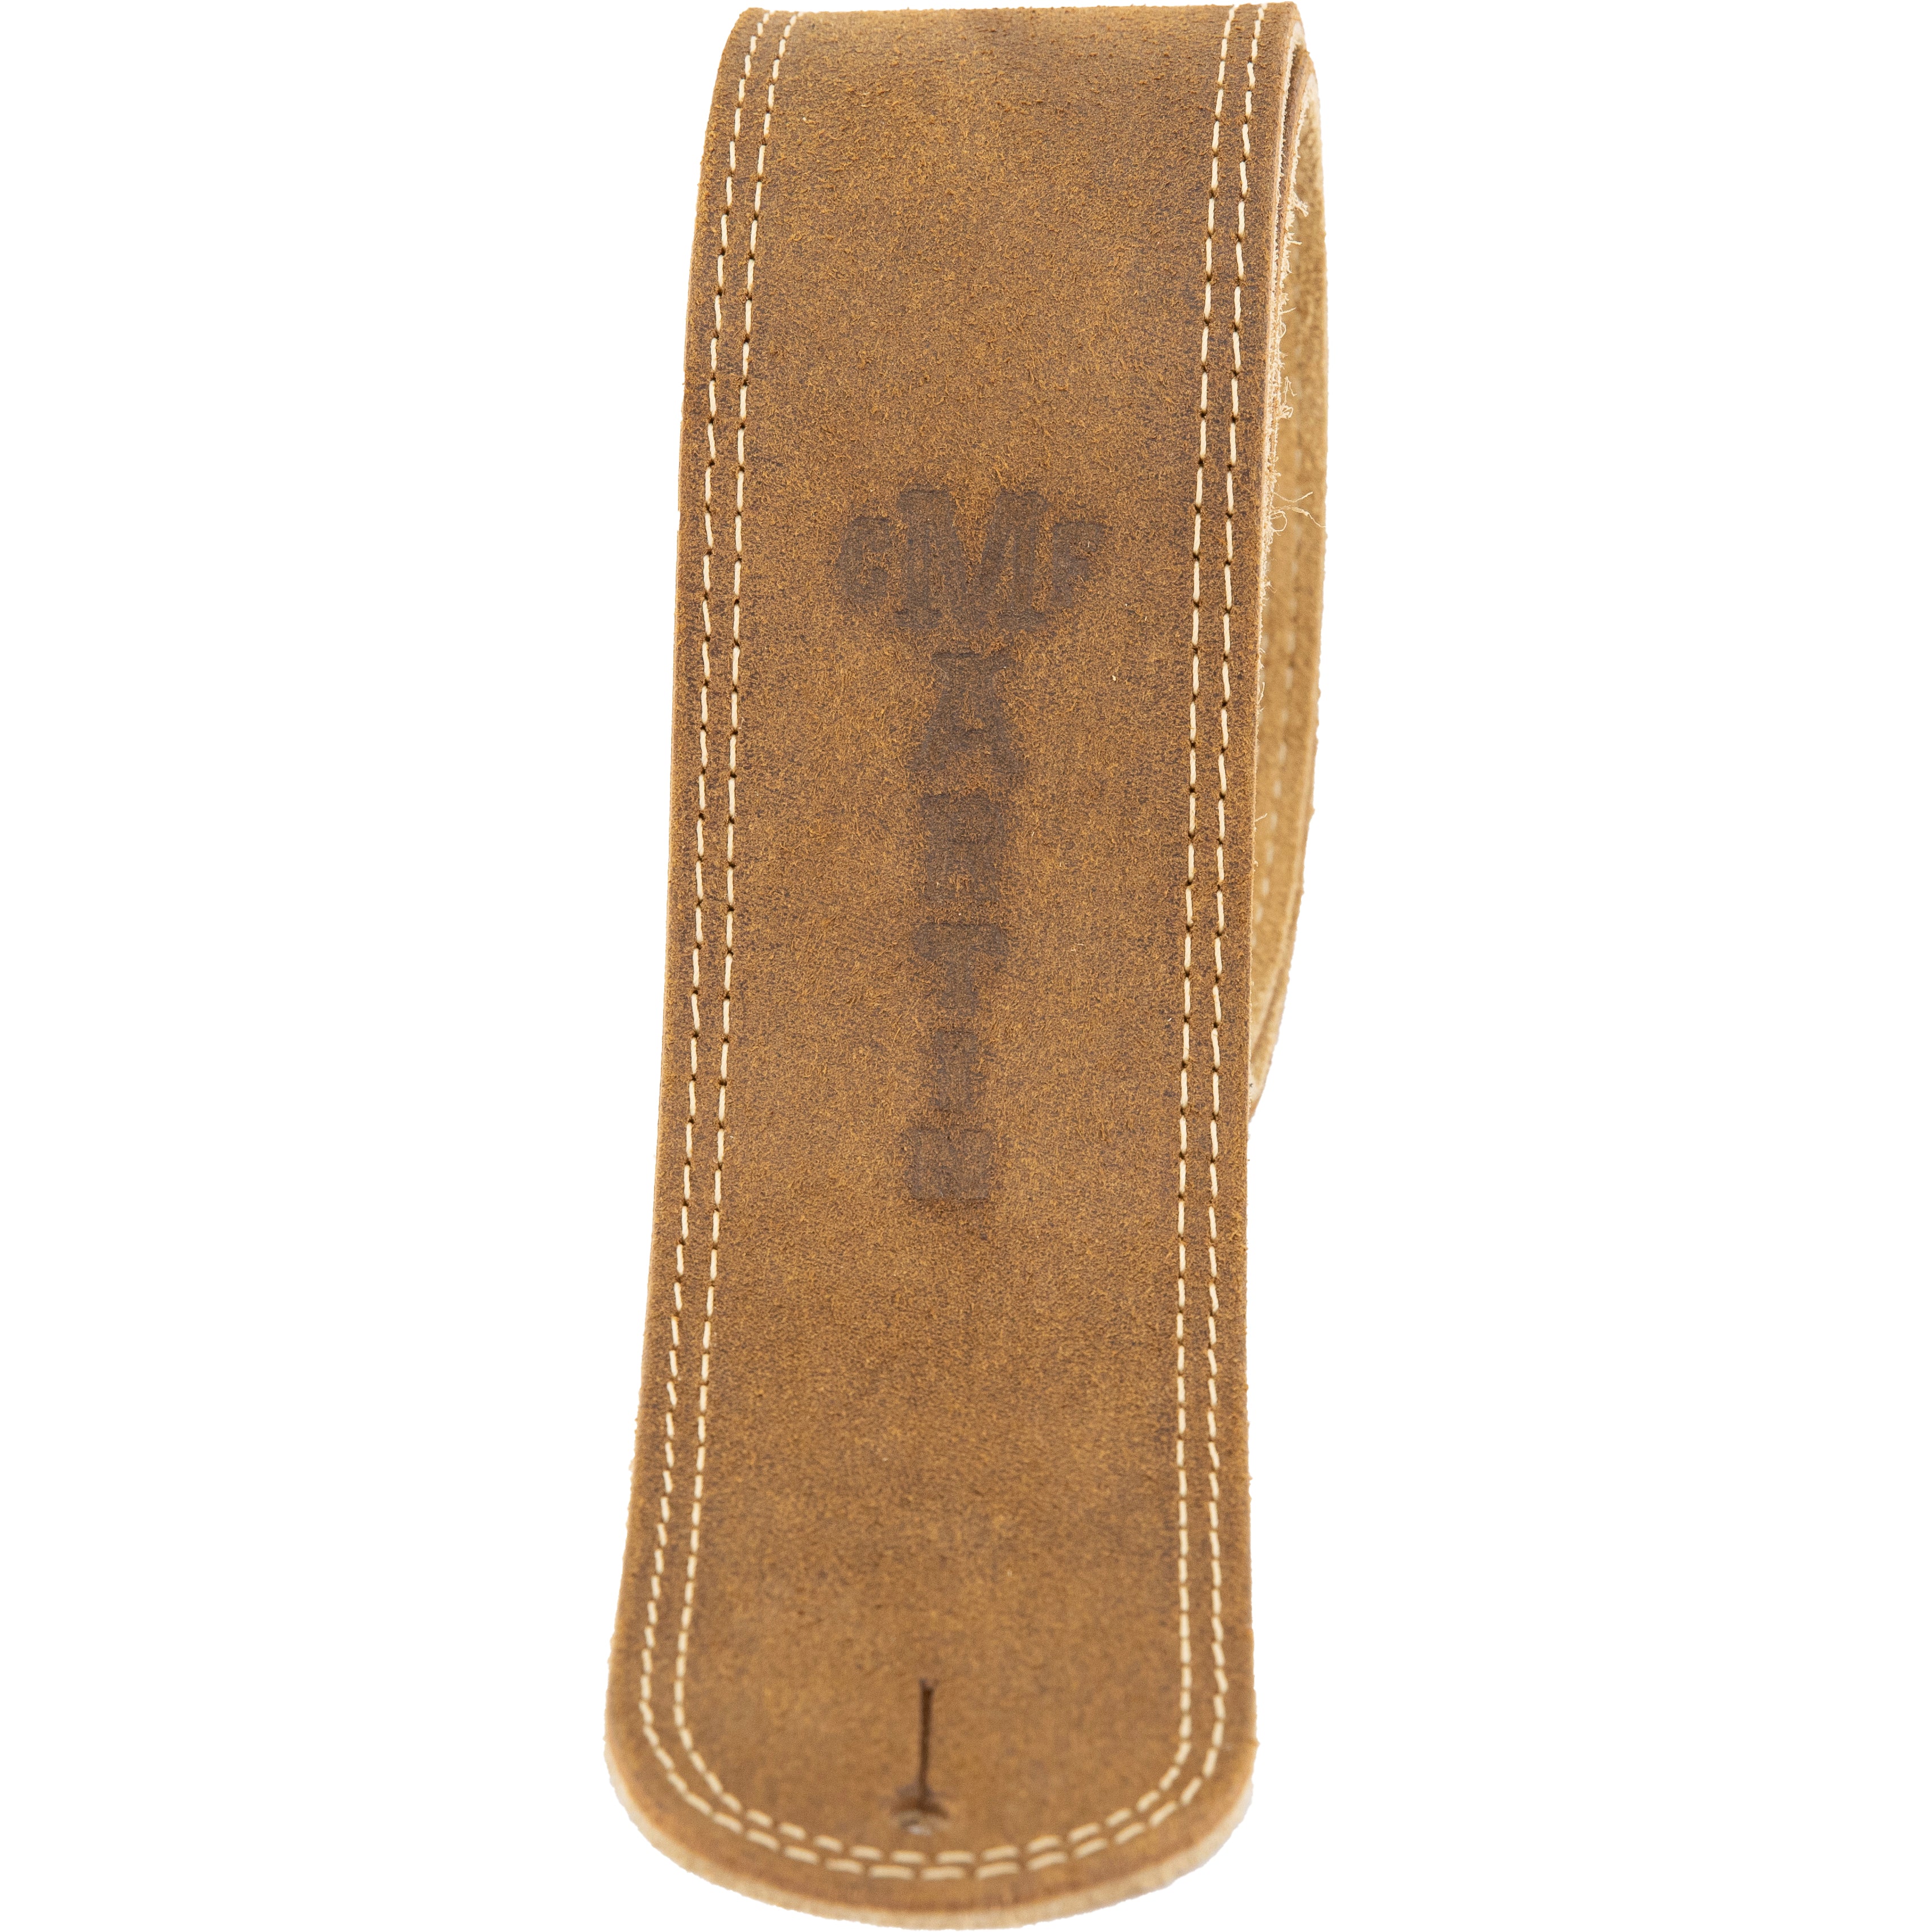 Martin Ball Glove Leather Guitar Strap Distressed Suede